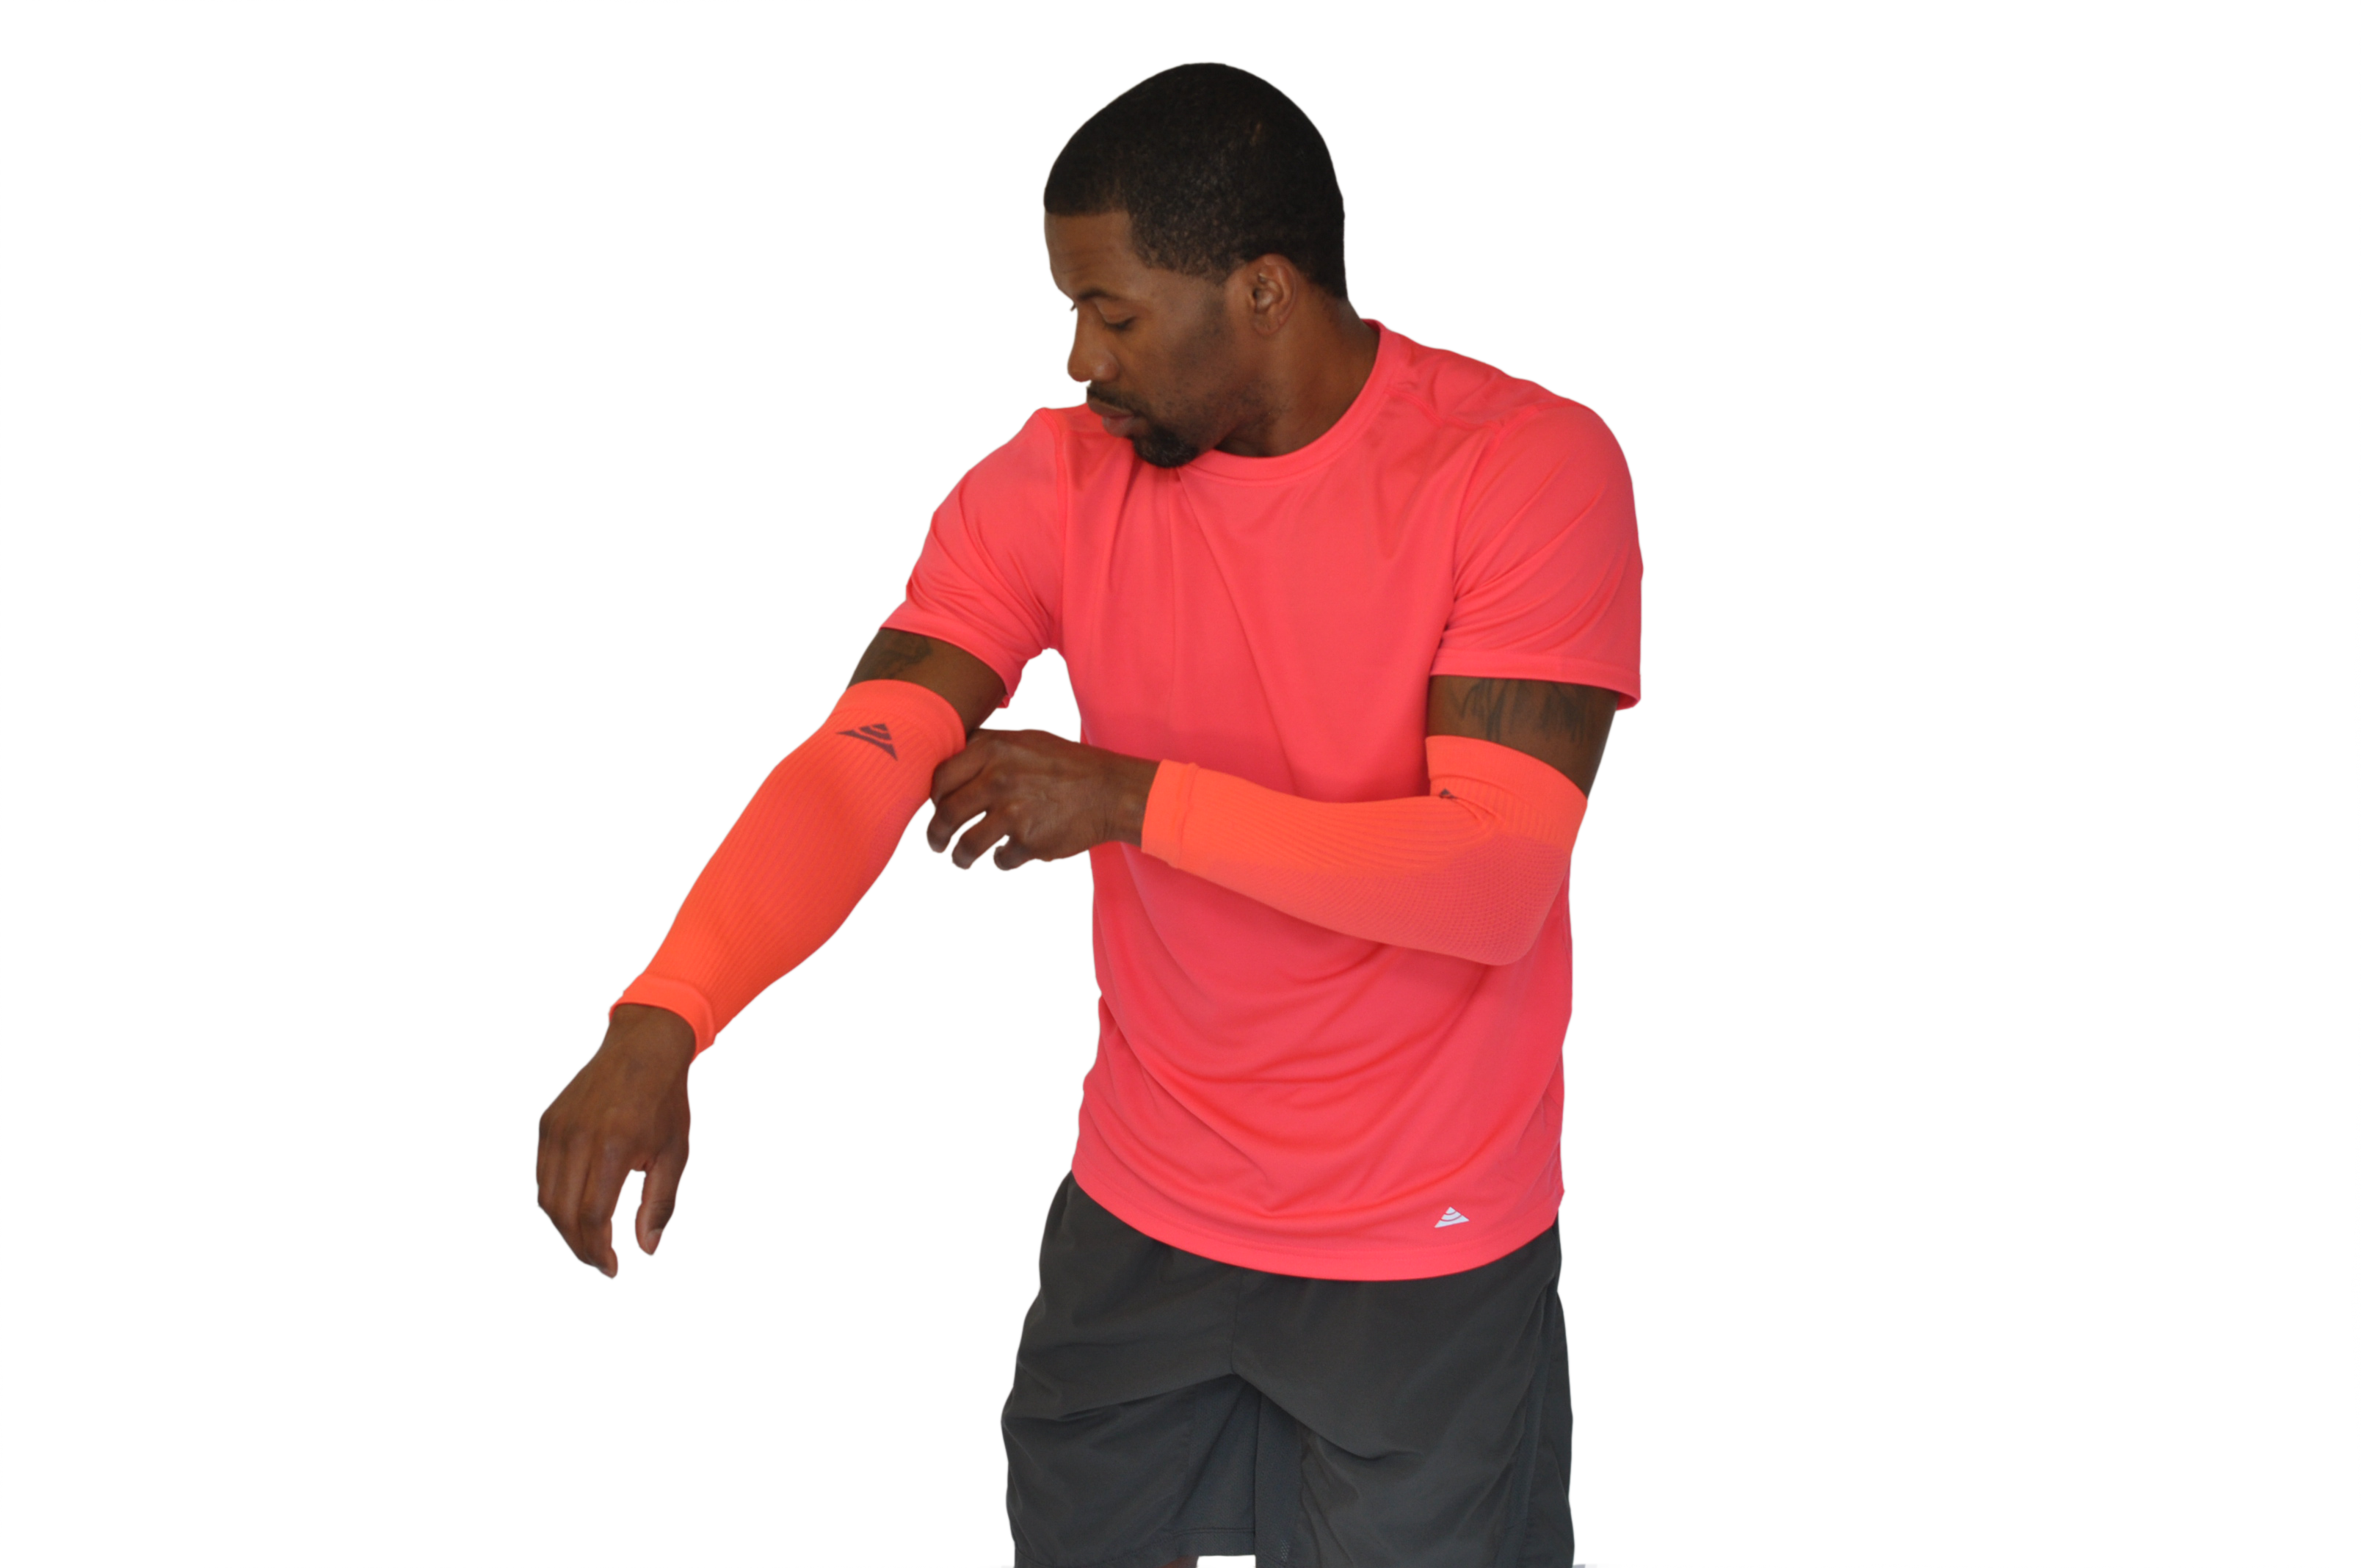 LUMAX Therapy Arm Sleeves